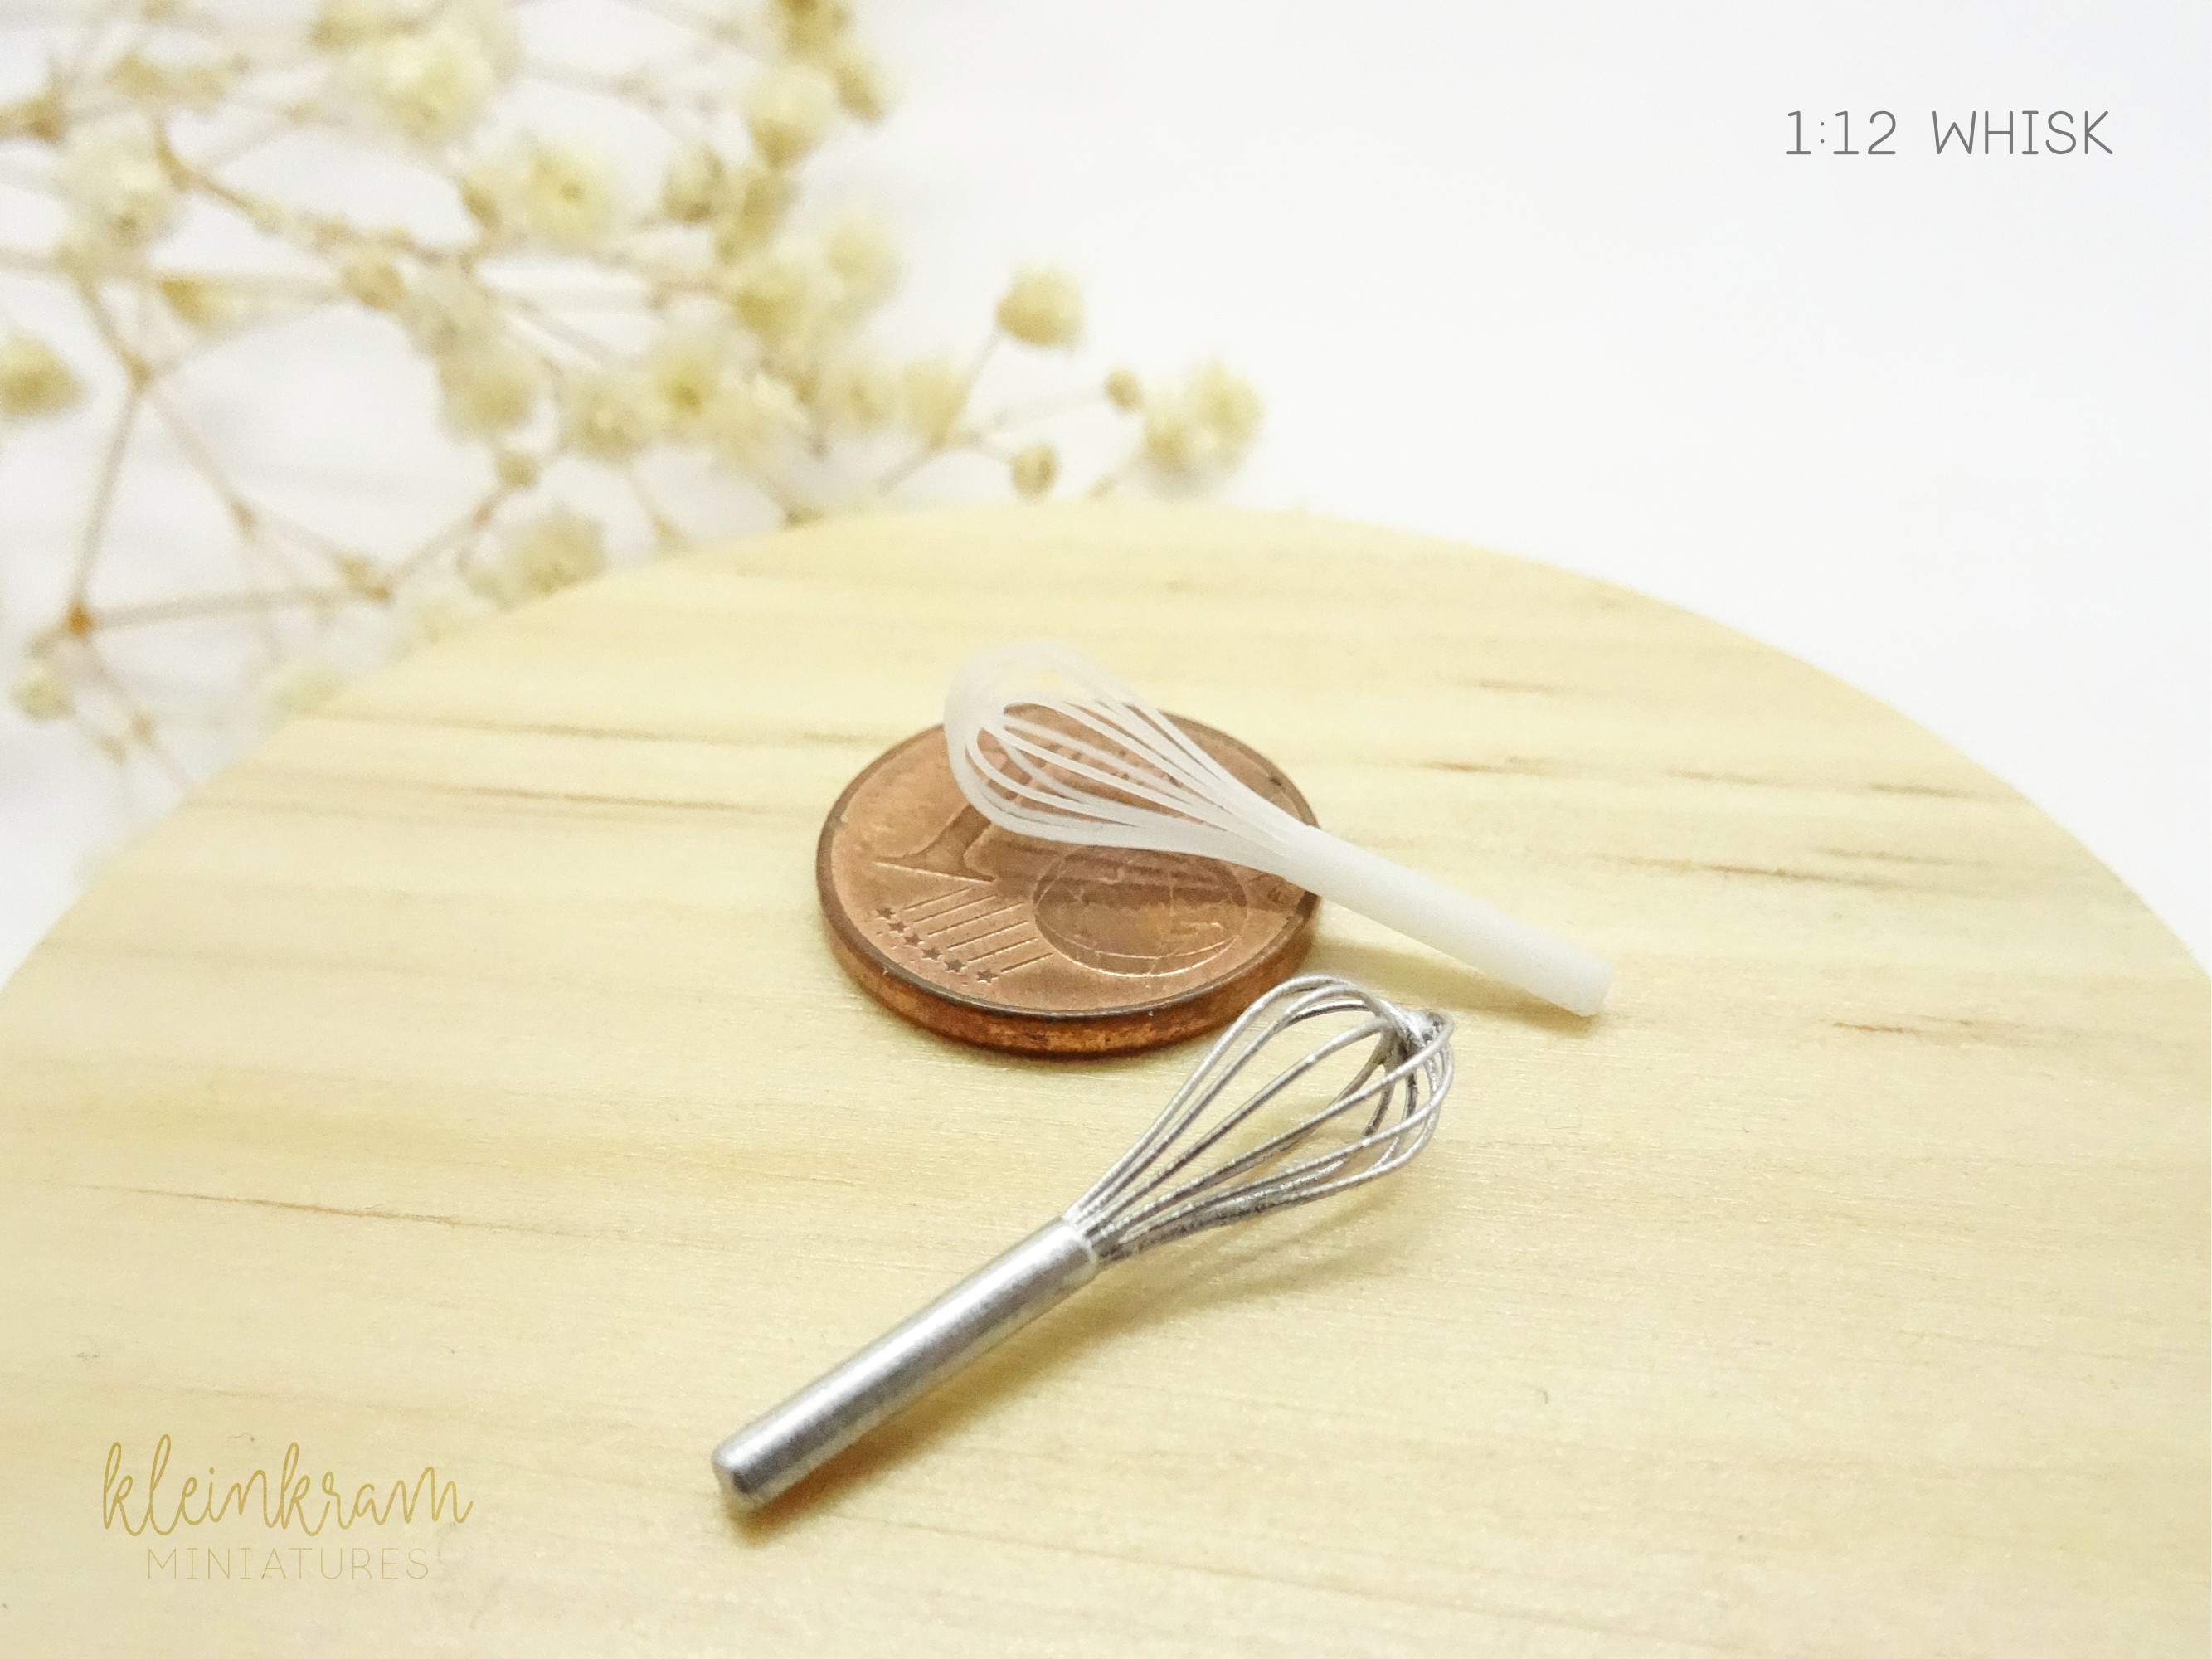 Whisk - 1:12 Miniature